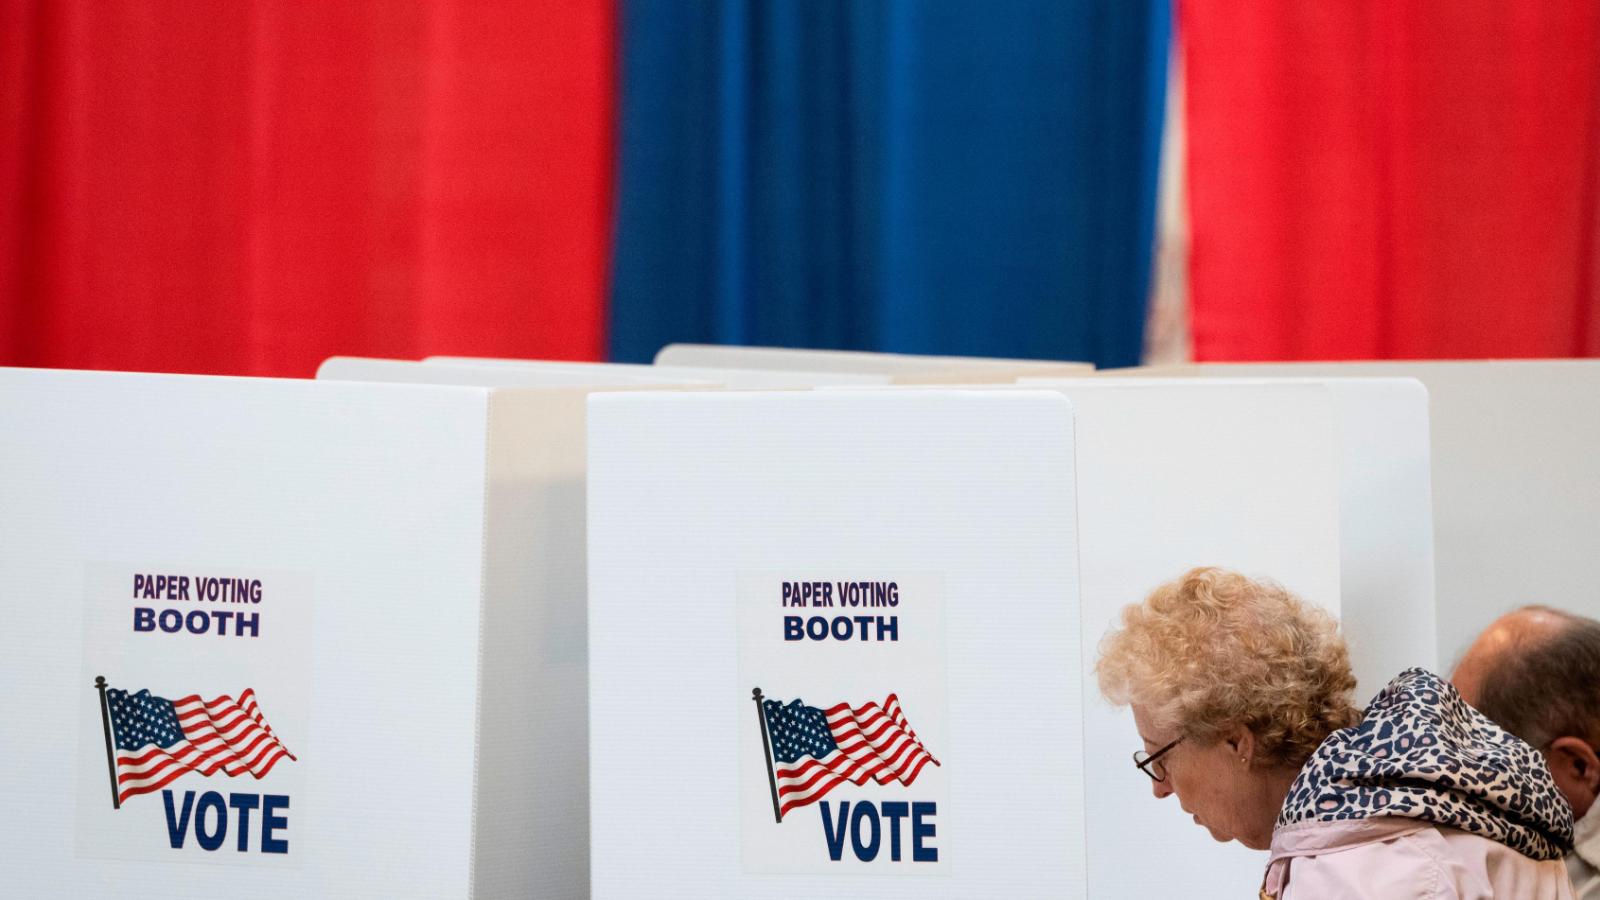 How do the midterm elections impact the 2024 presidential elections in